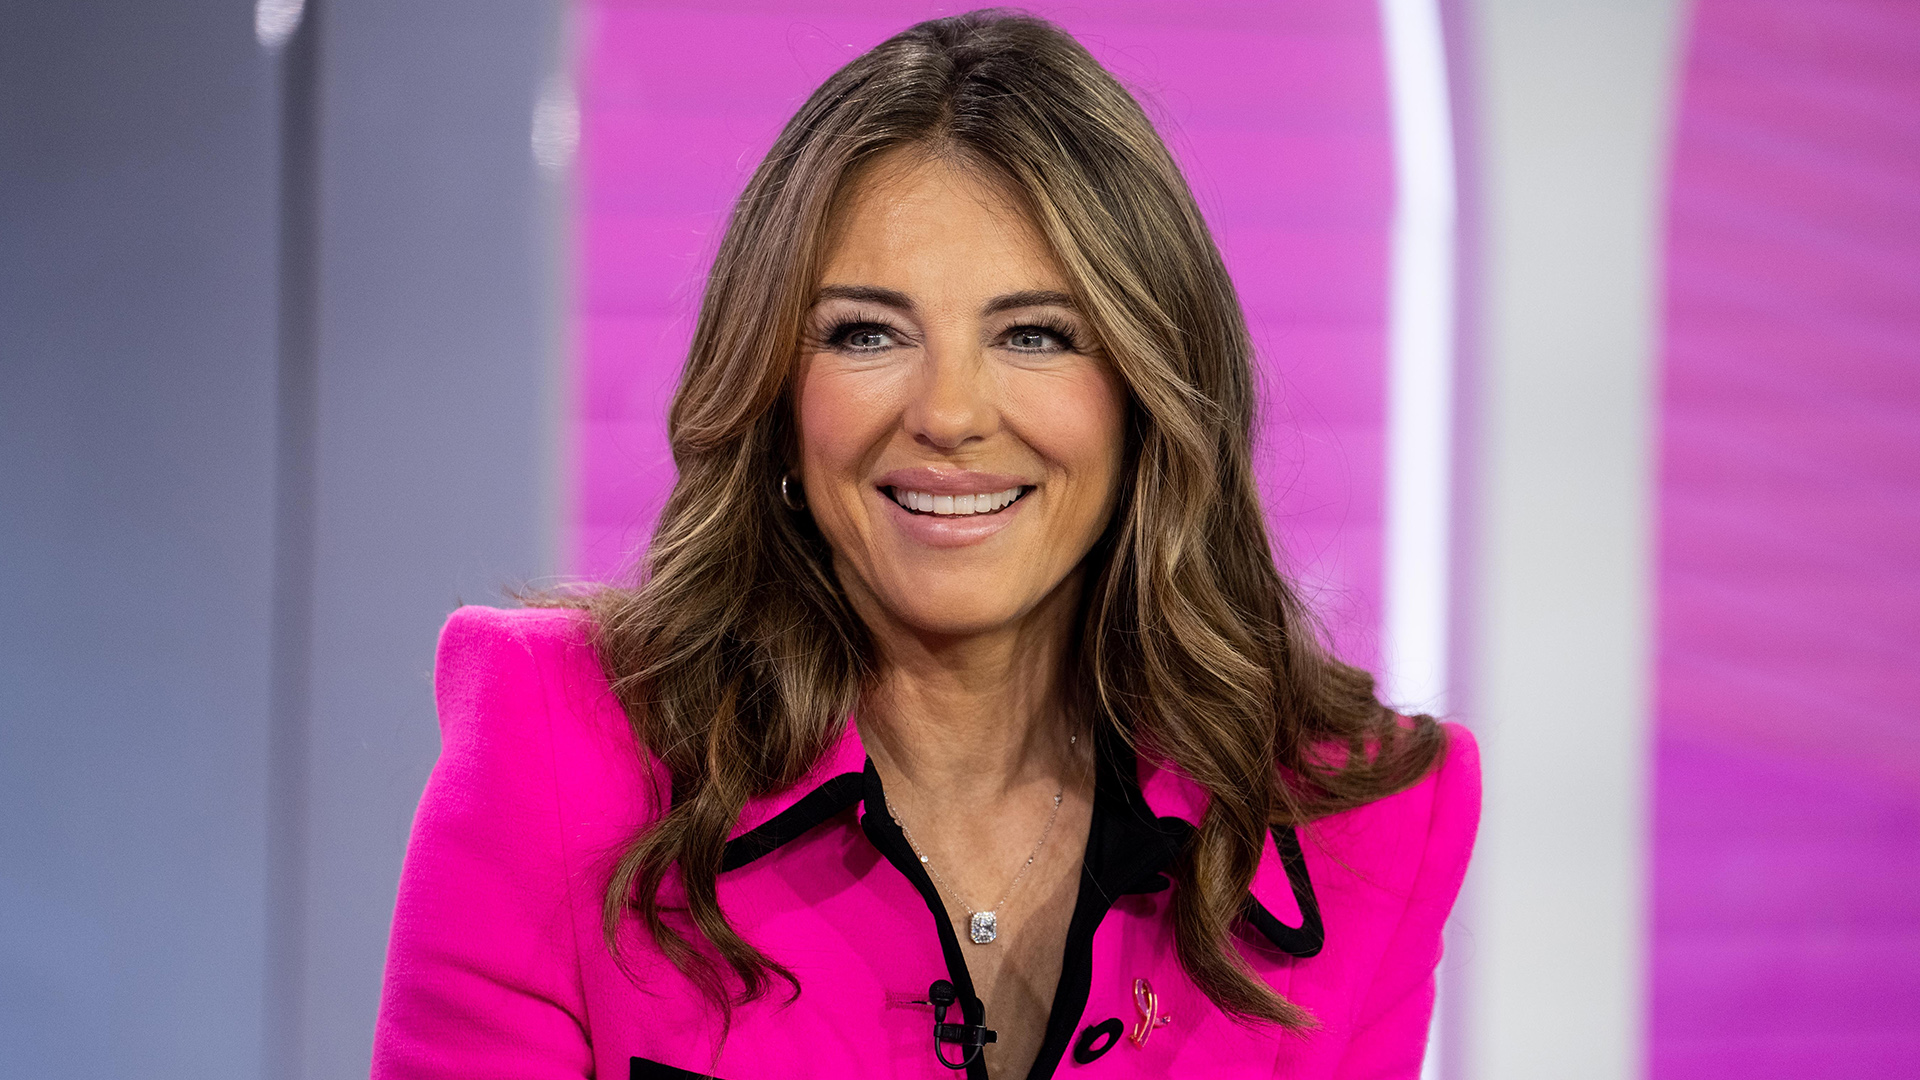 Elizabeth Hurley talks strides in breast cancer awareness, research